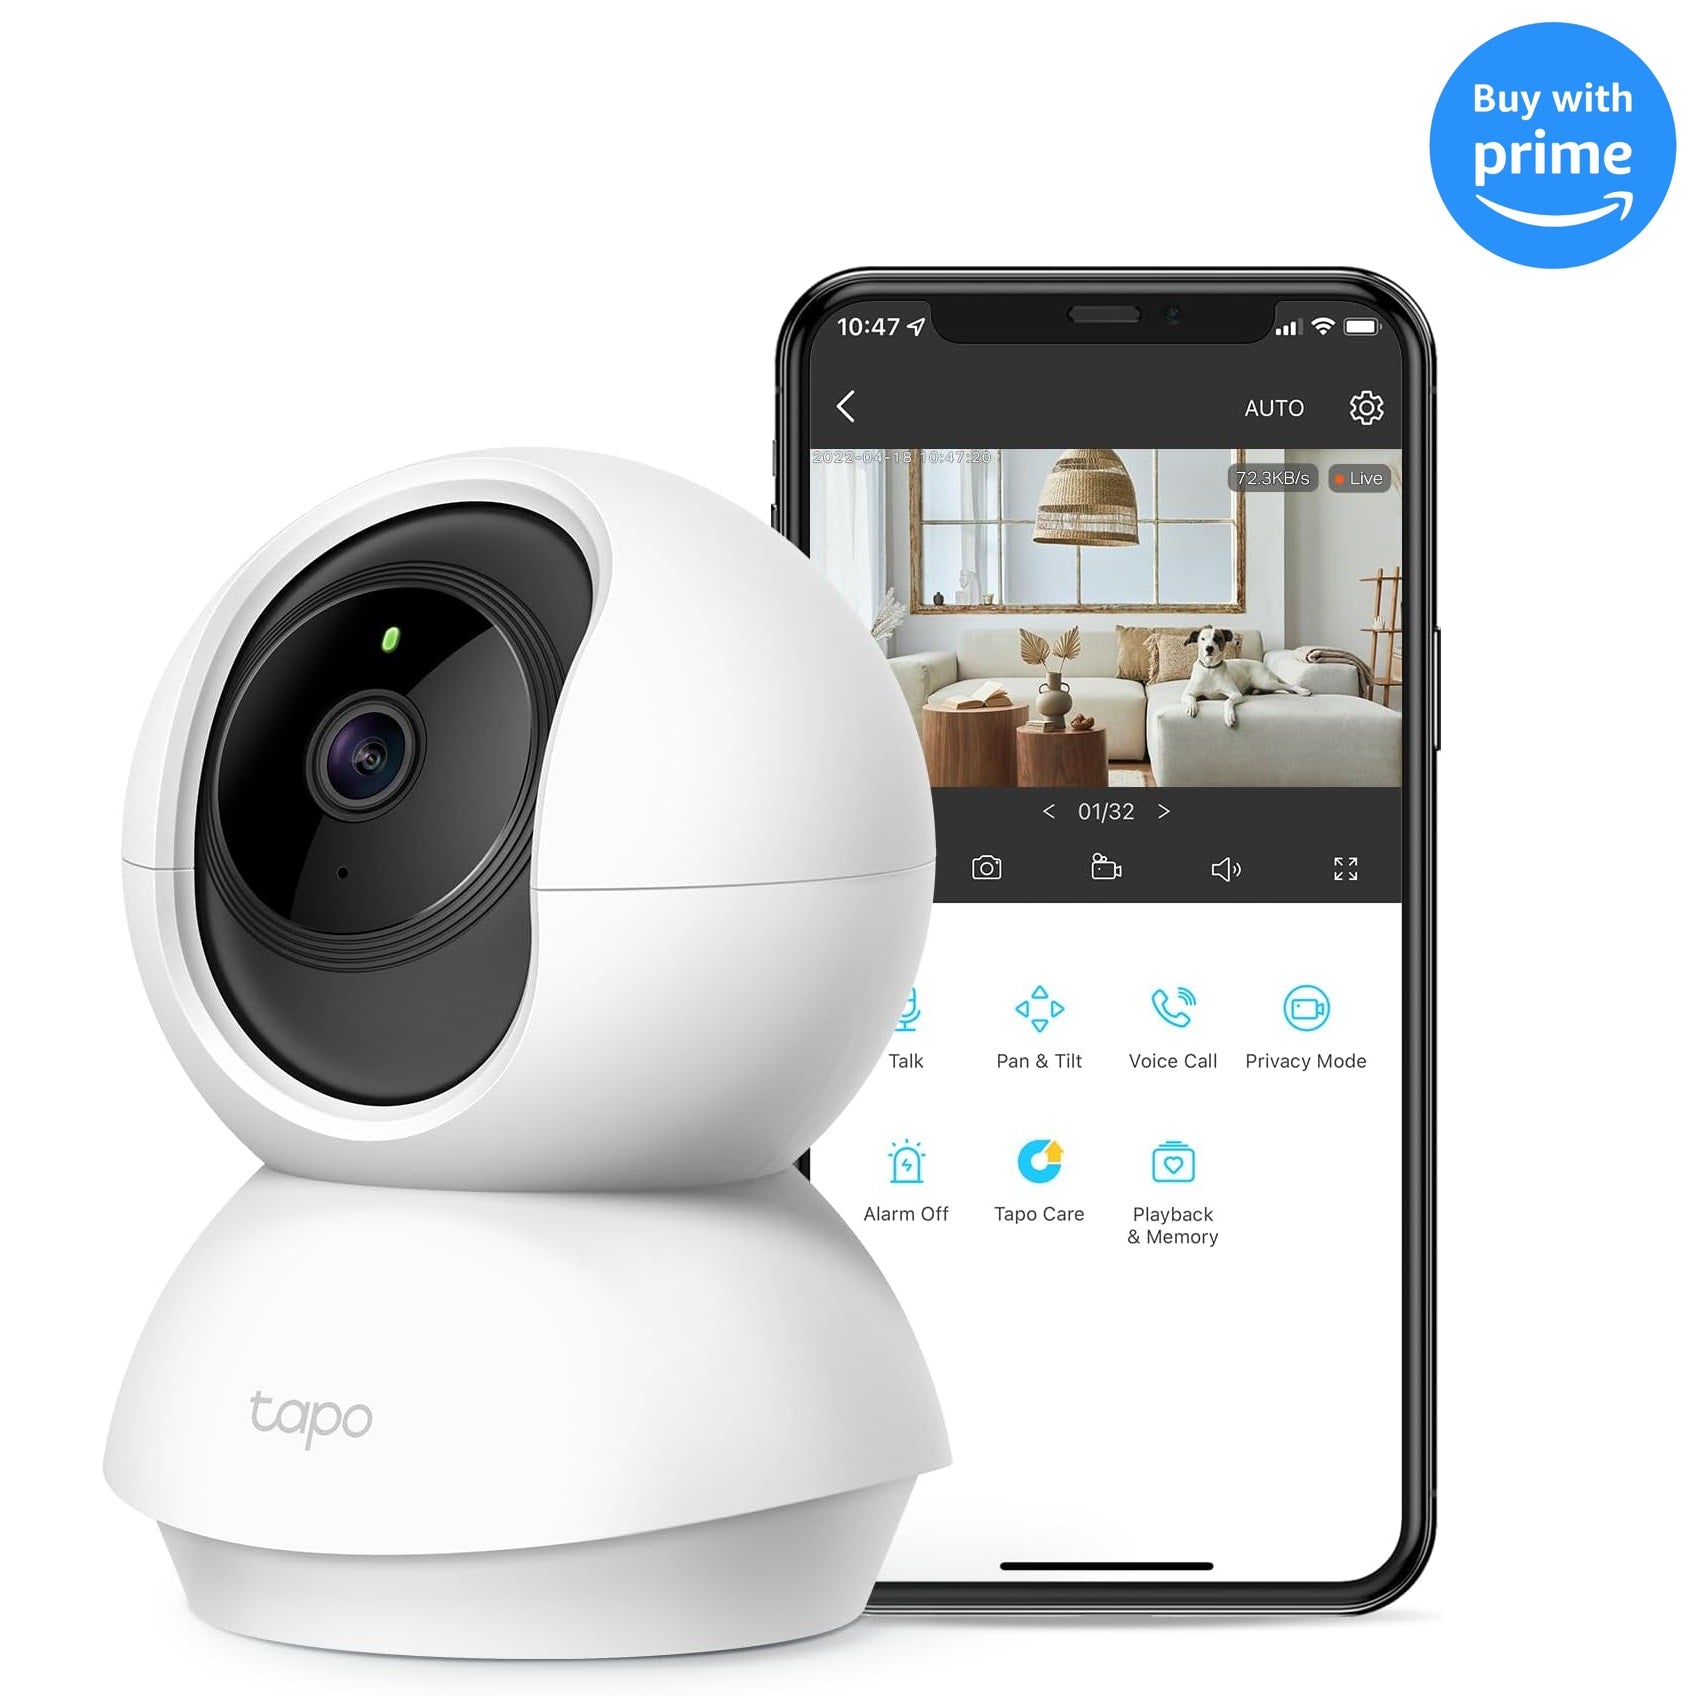 TP-Link Tapo C210 3MP Pan & Tilt Wi-Fi Security Camera with Night Vision